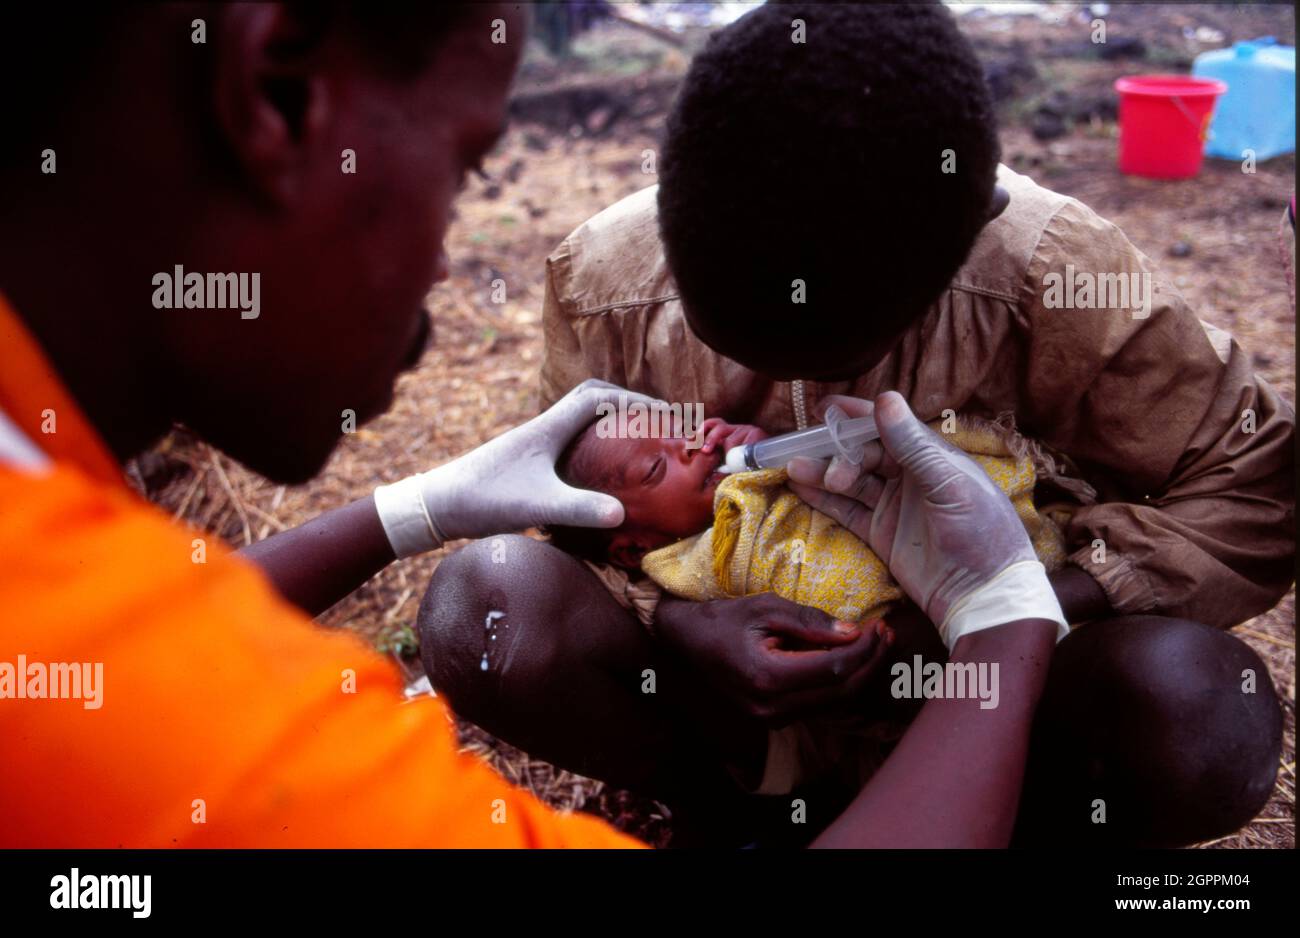 A MSF (Médecins Sans Frontières) doctor feeds a baby with a plastic syringe in a Rwandan refugee camp where multitudes of people fleeing from the genocide and civil war in neighbouring Rwanda wait in a refugee camp in Goma in the Democratic Republic of Congo. Stock Photo